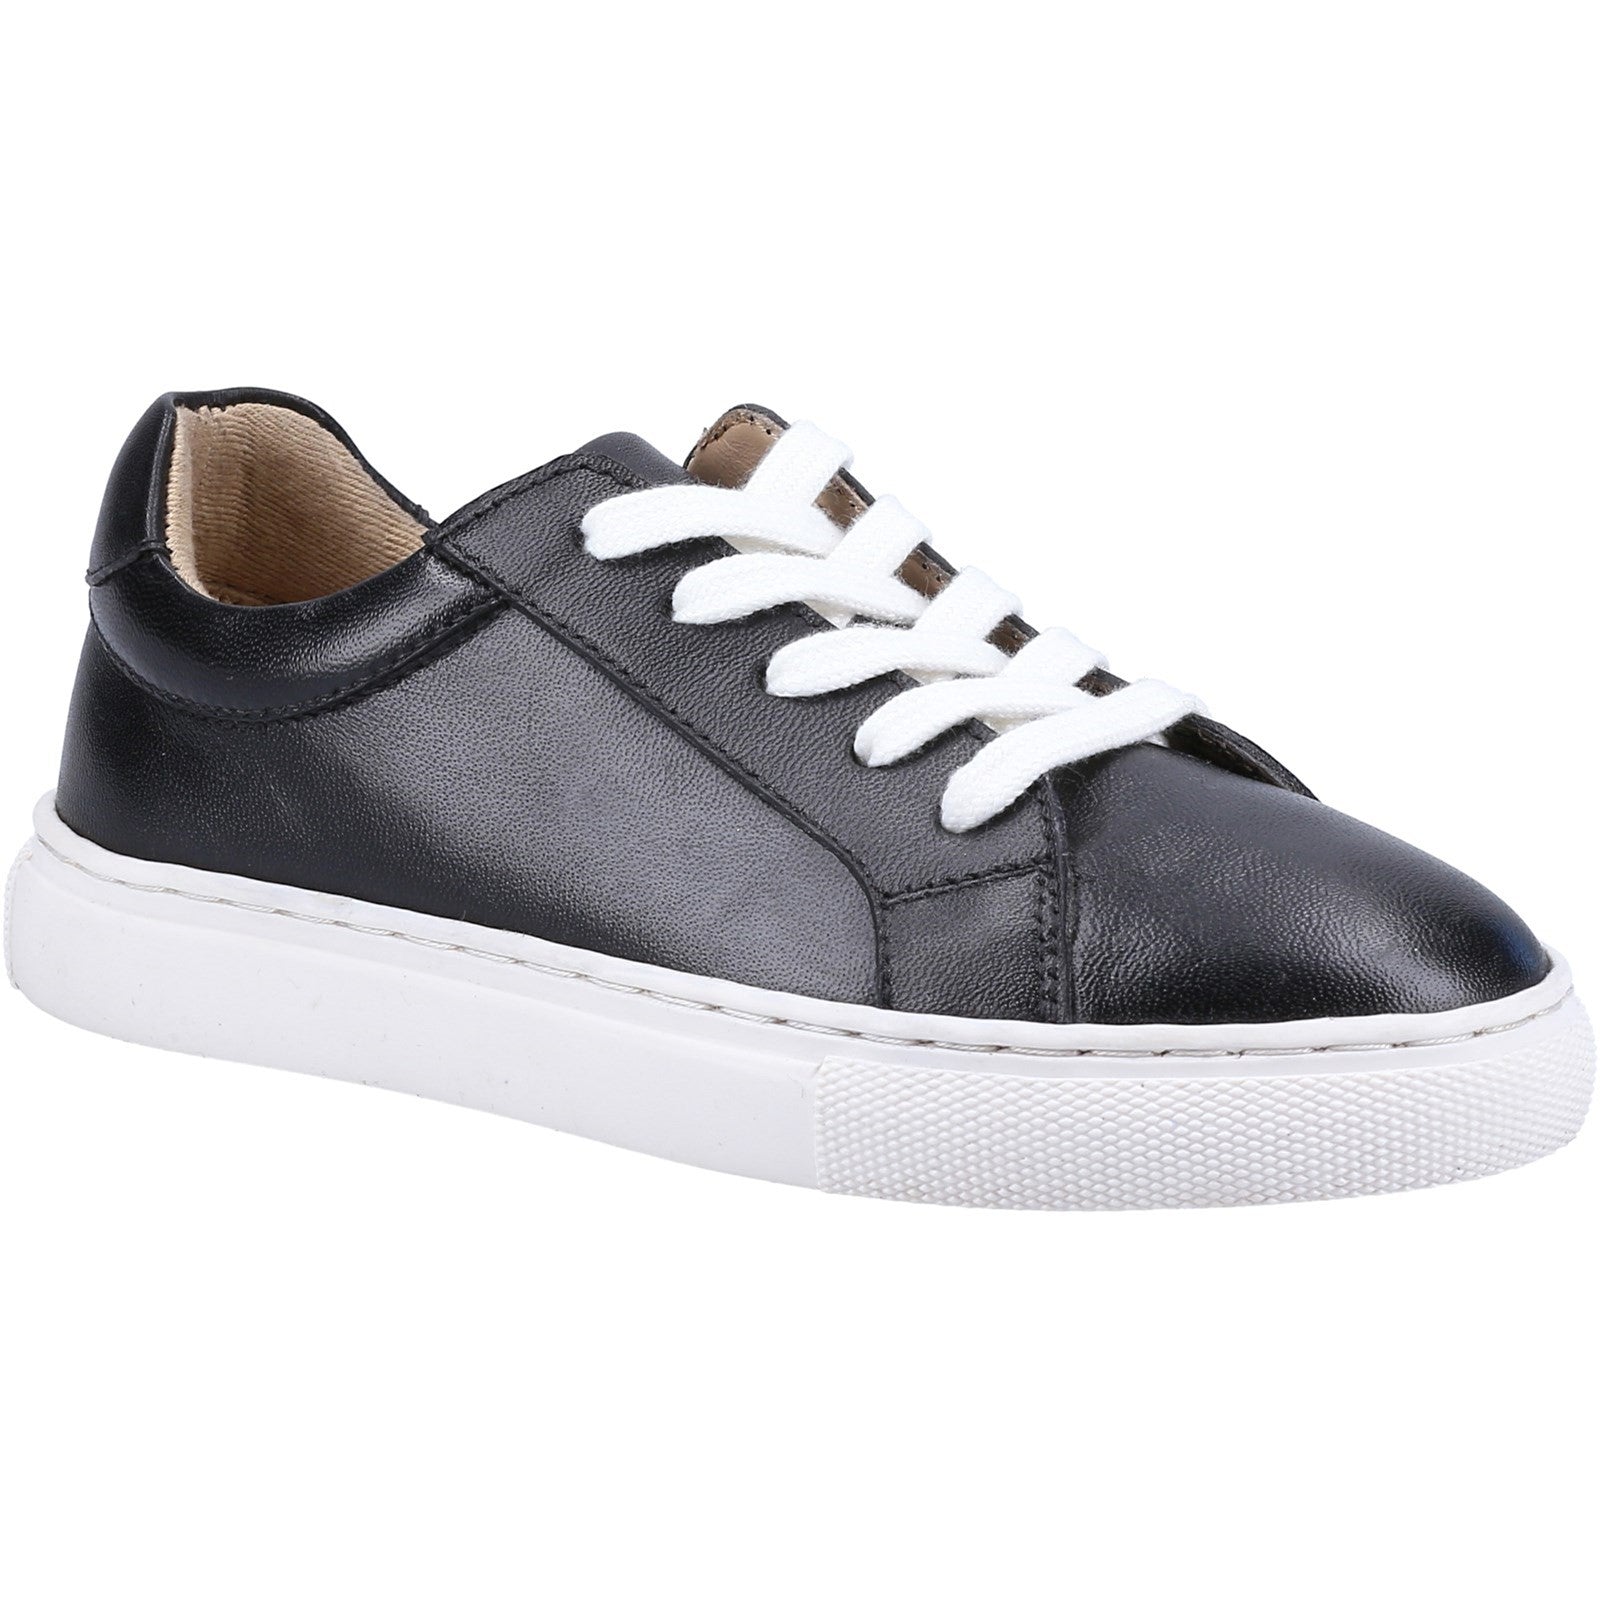 Hush Puppies Boys Colton Leather Trainers - Black